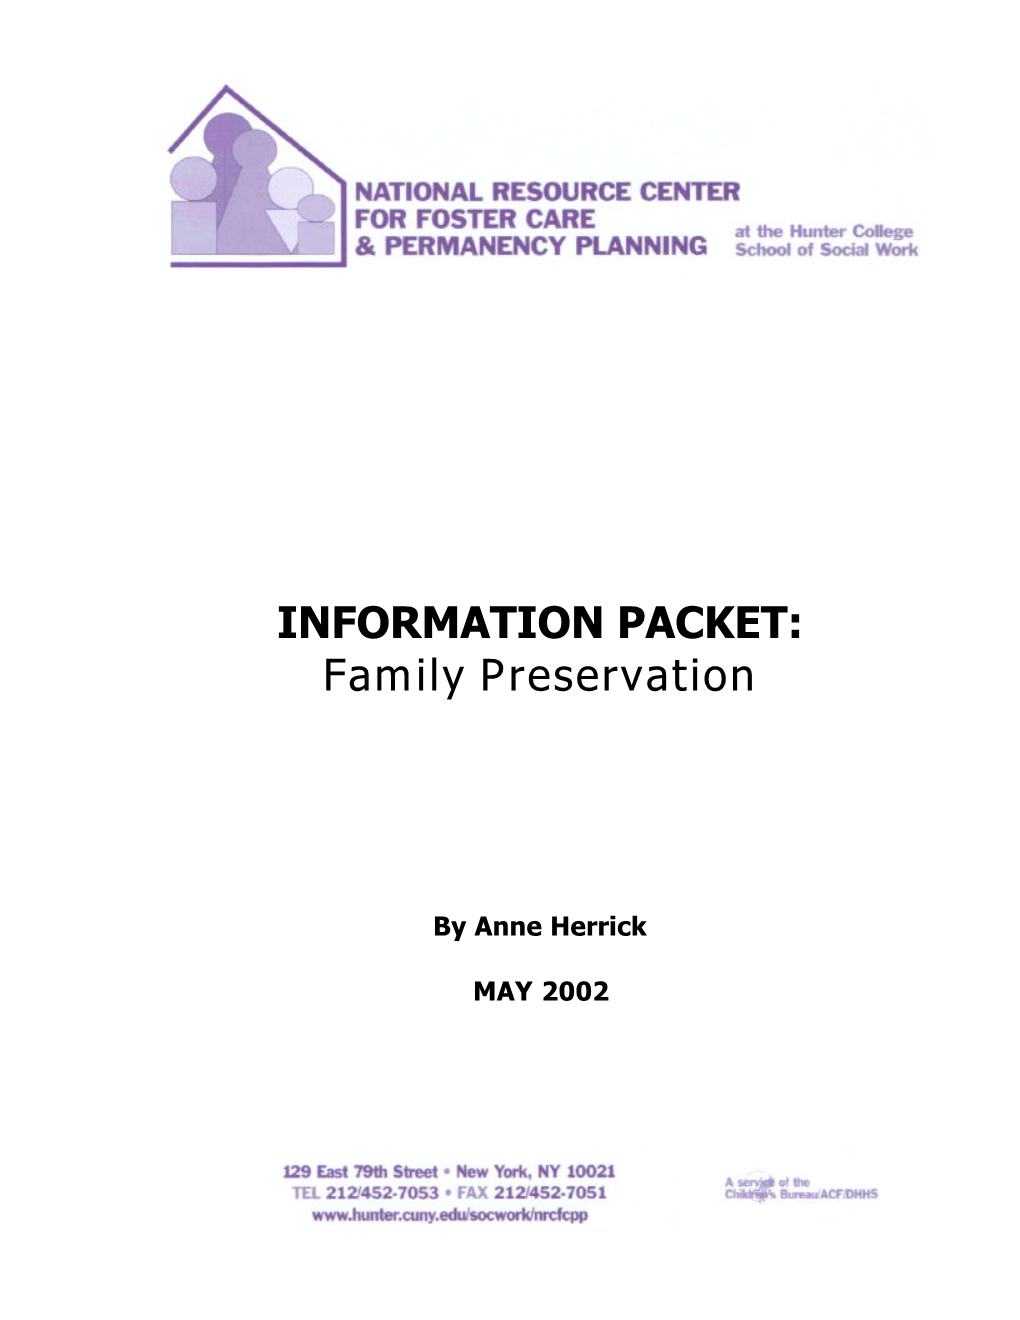 INFORMATION PACKET: Family Preservation